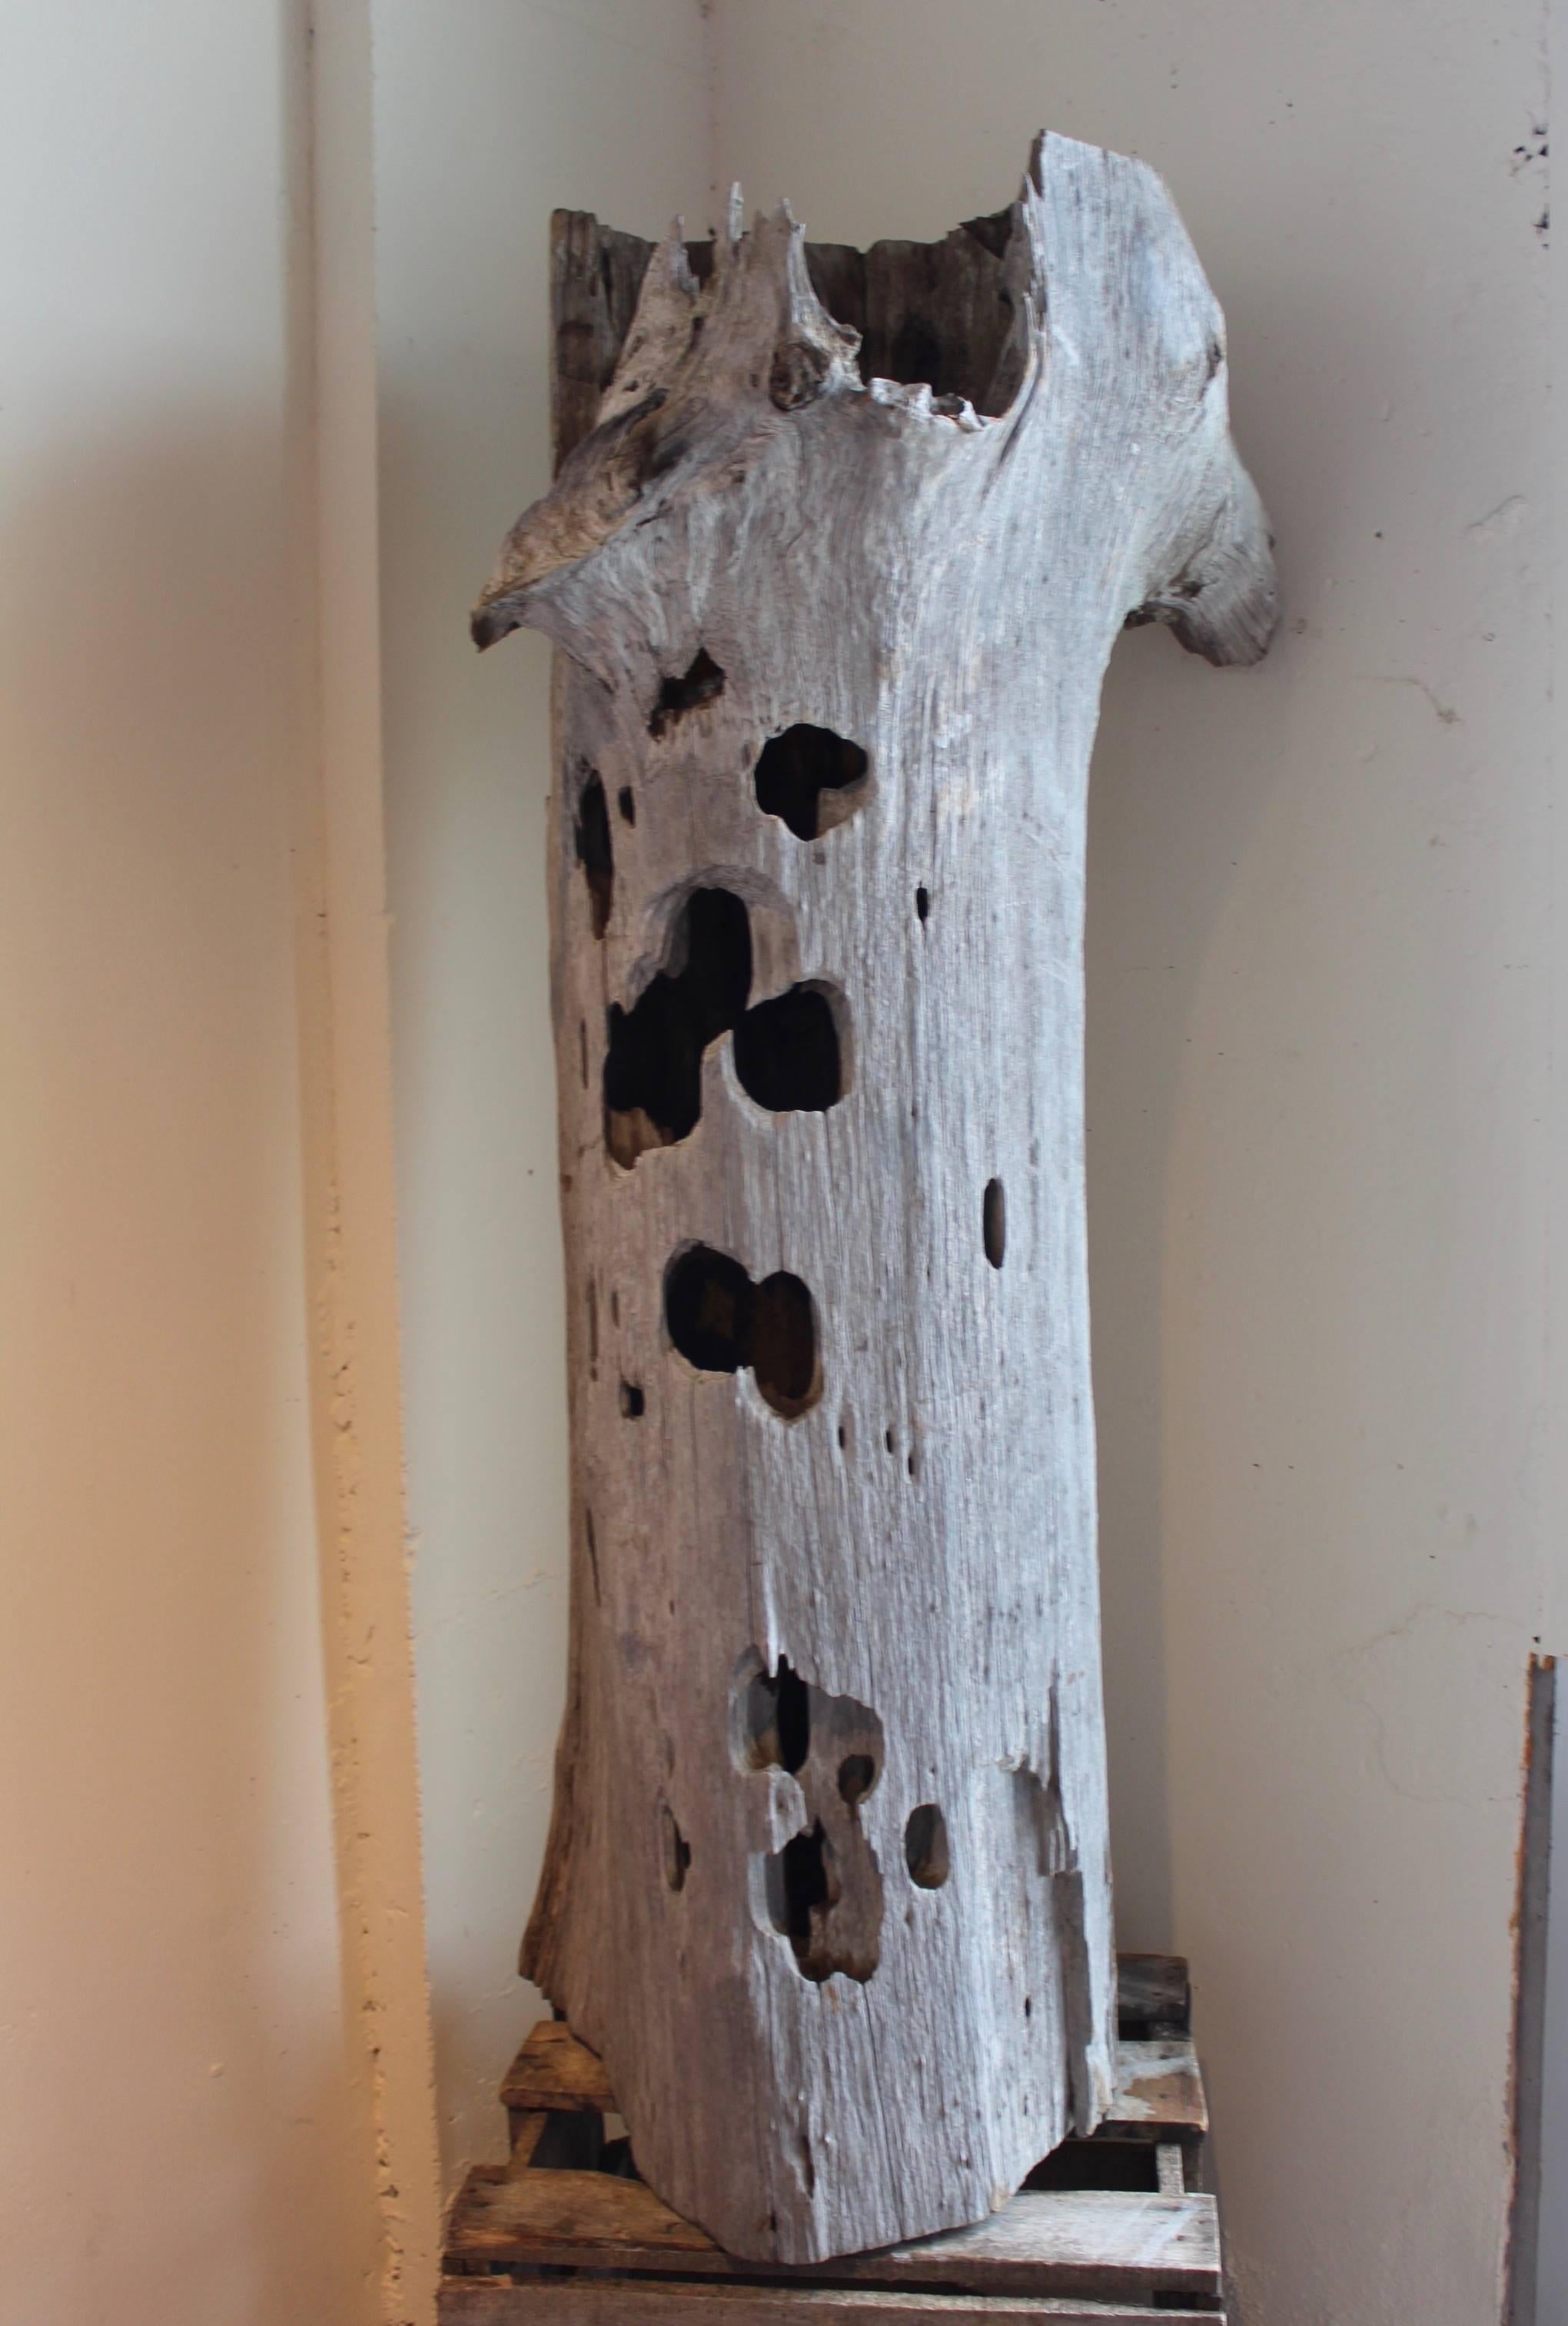 Organic coastal driftwood trunk sculpture. 
Natural bleached coastal cypress wood used as decorative sculpture.
With natural open holes through out the front of driftwood.
Hollow inside with oval textures where water has flown through, 
can be